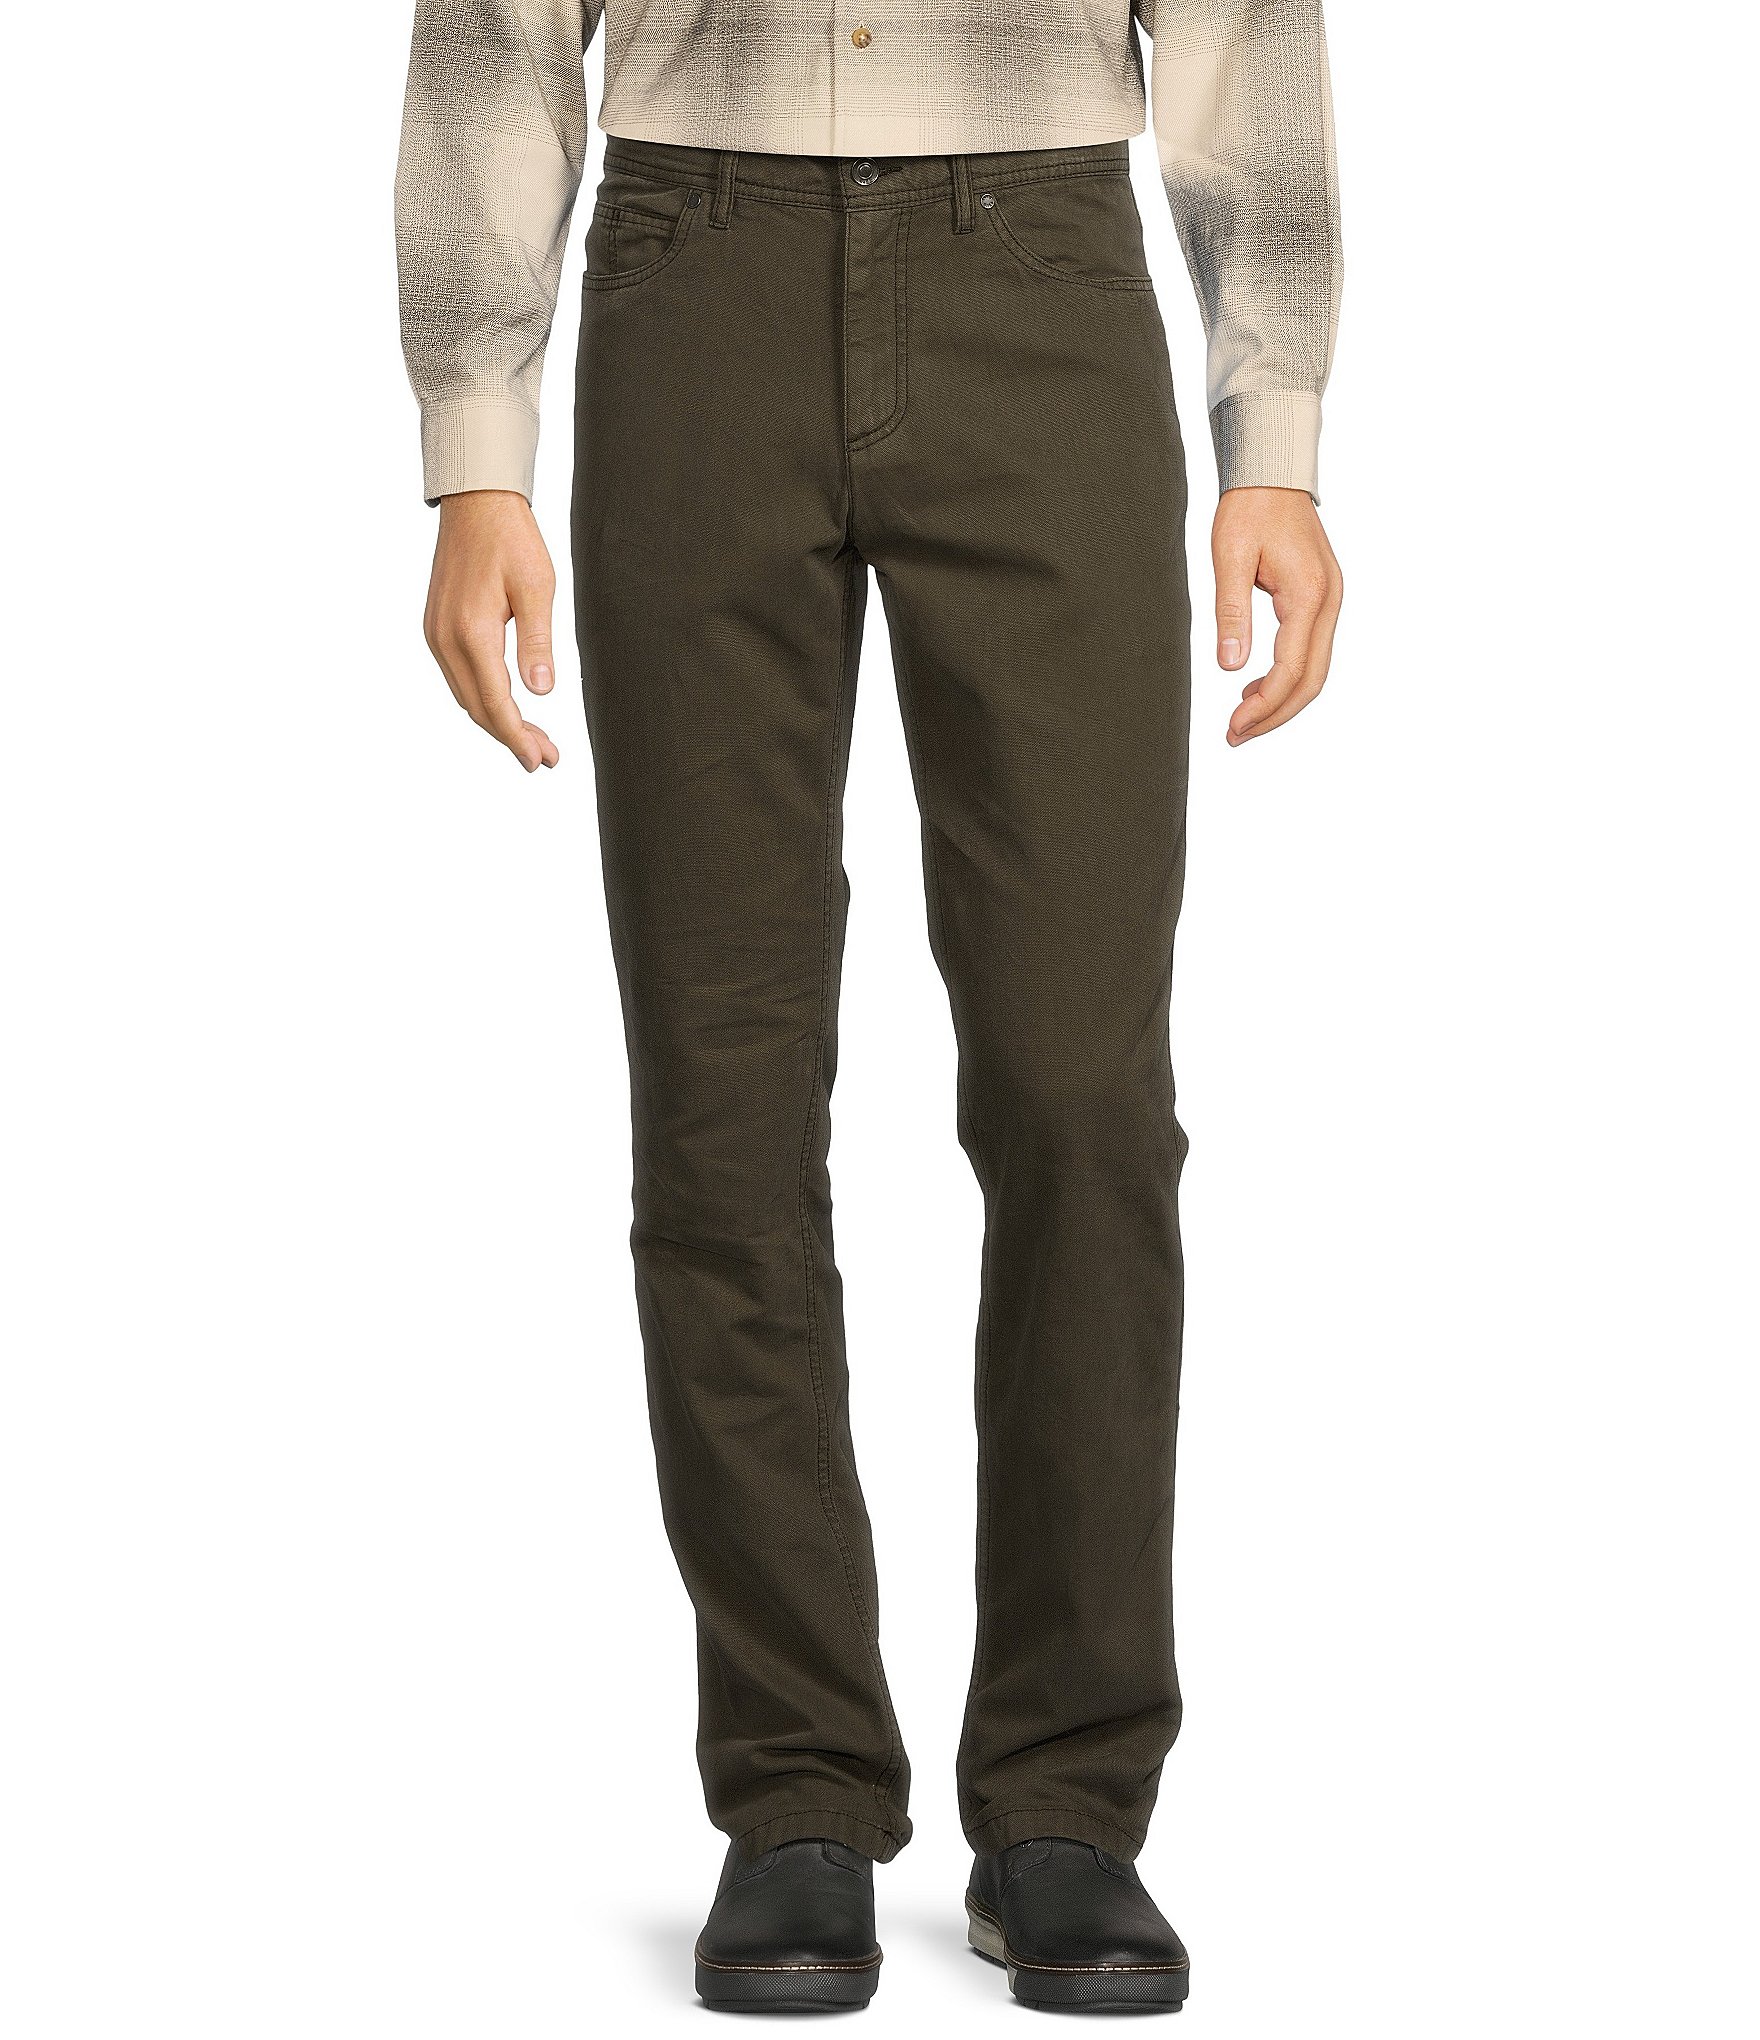 Rowm The Lodge Collection Flat Front 5-Pocket Canvas Pants | Dillard's